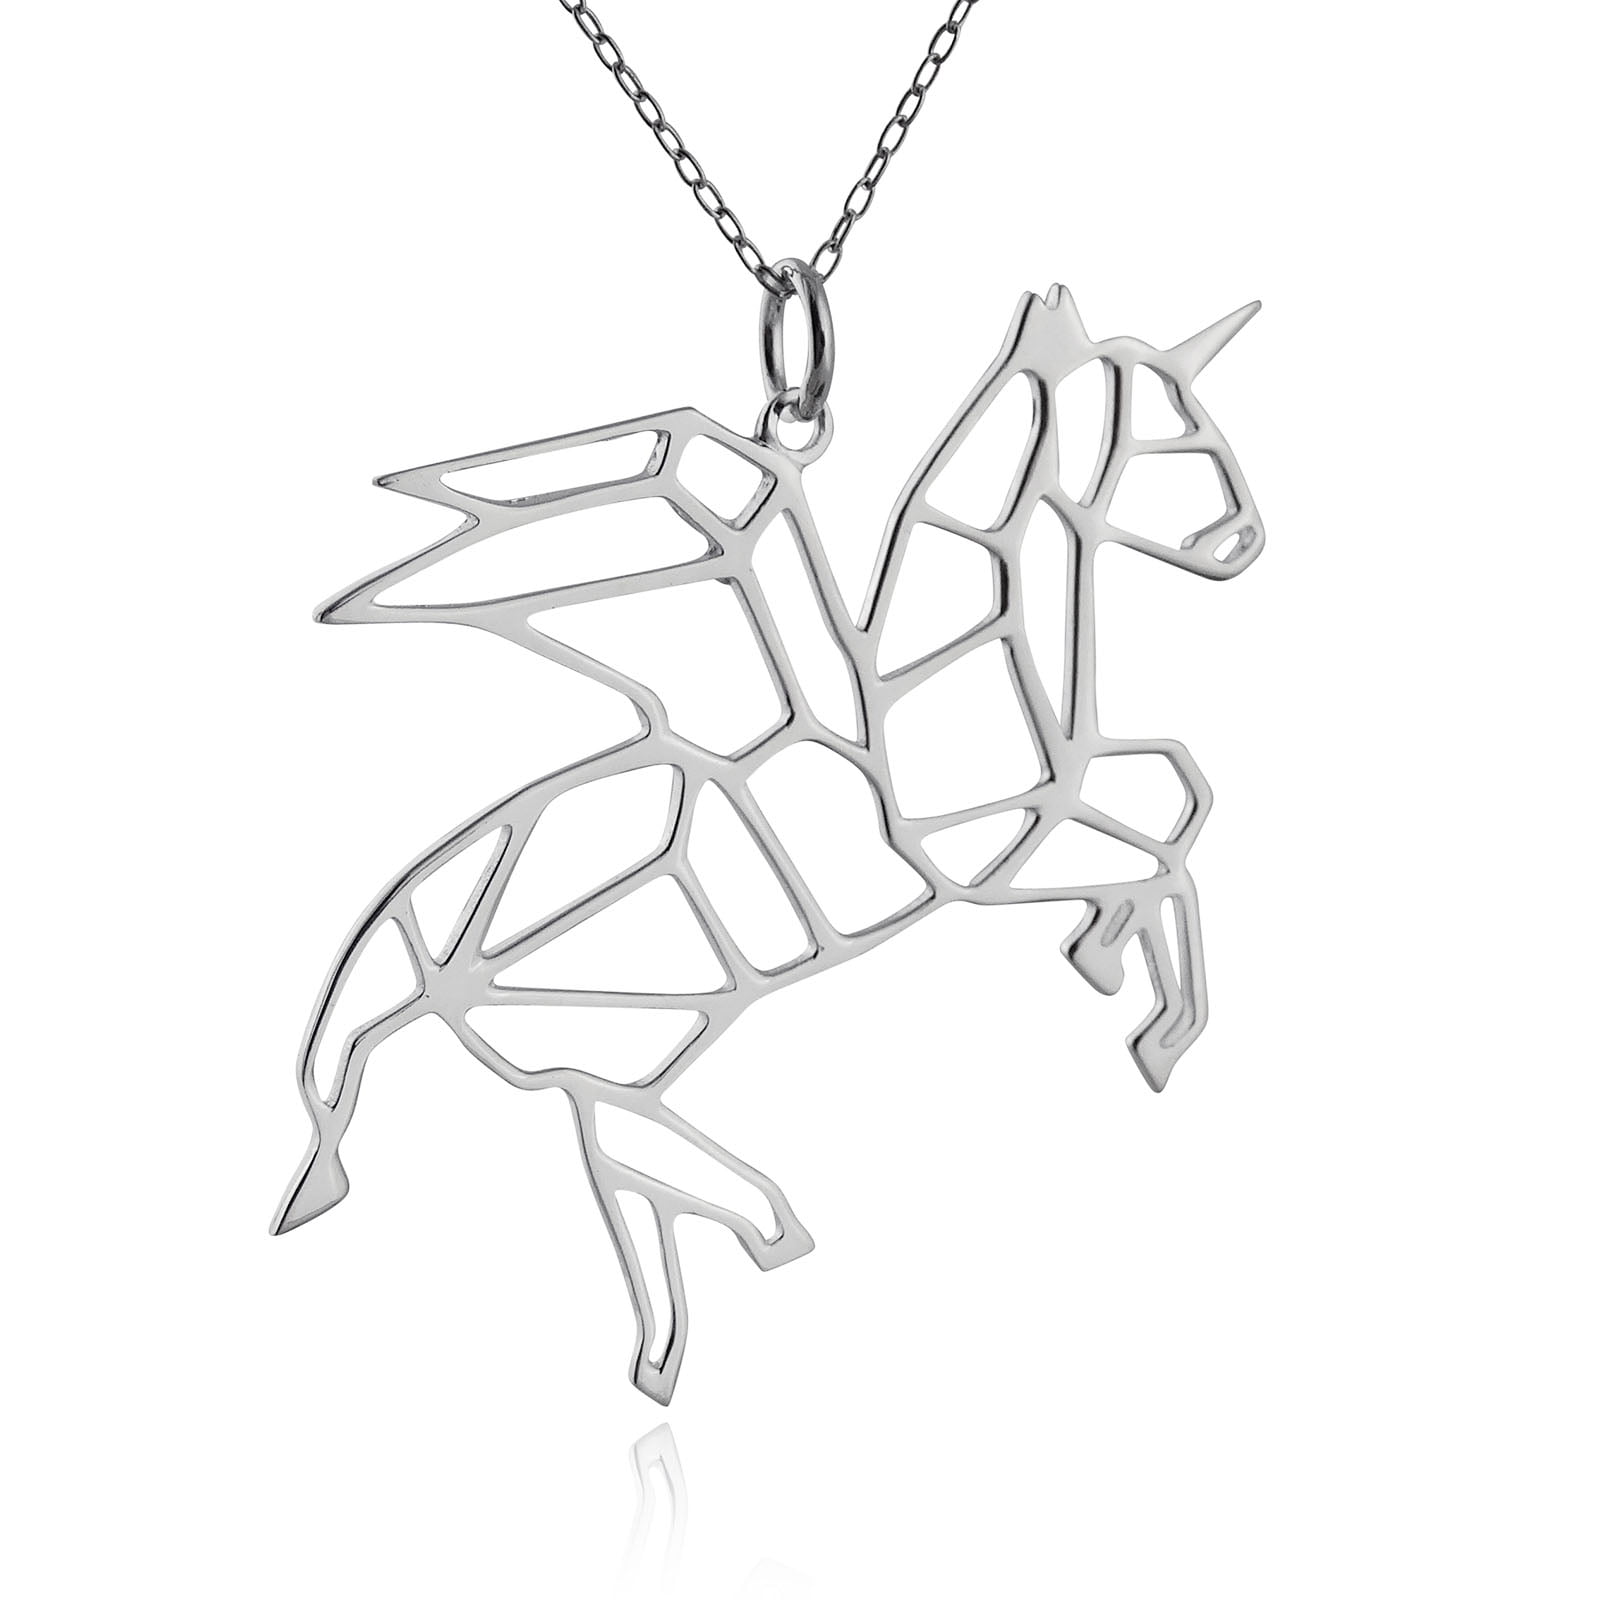 Infinity Close 925 Sterling Silver Pegasus Necklace; Pegasus Pendant; Silver Unicorn Necklace; 925 Unicorn Pegasus Necklace; Flying Horse